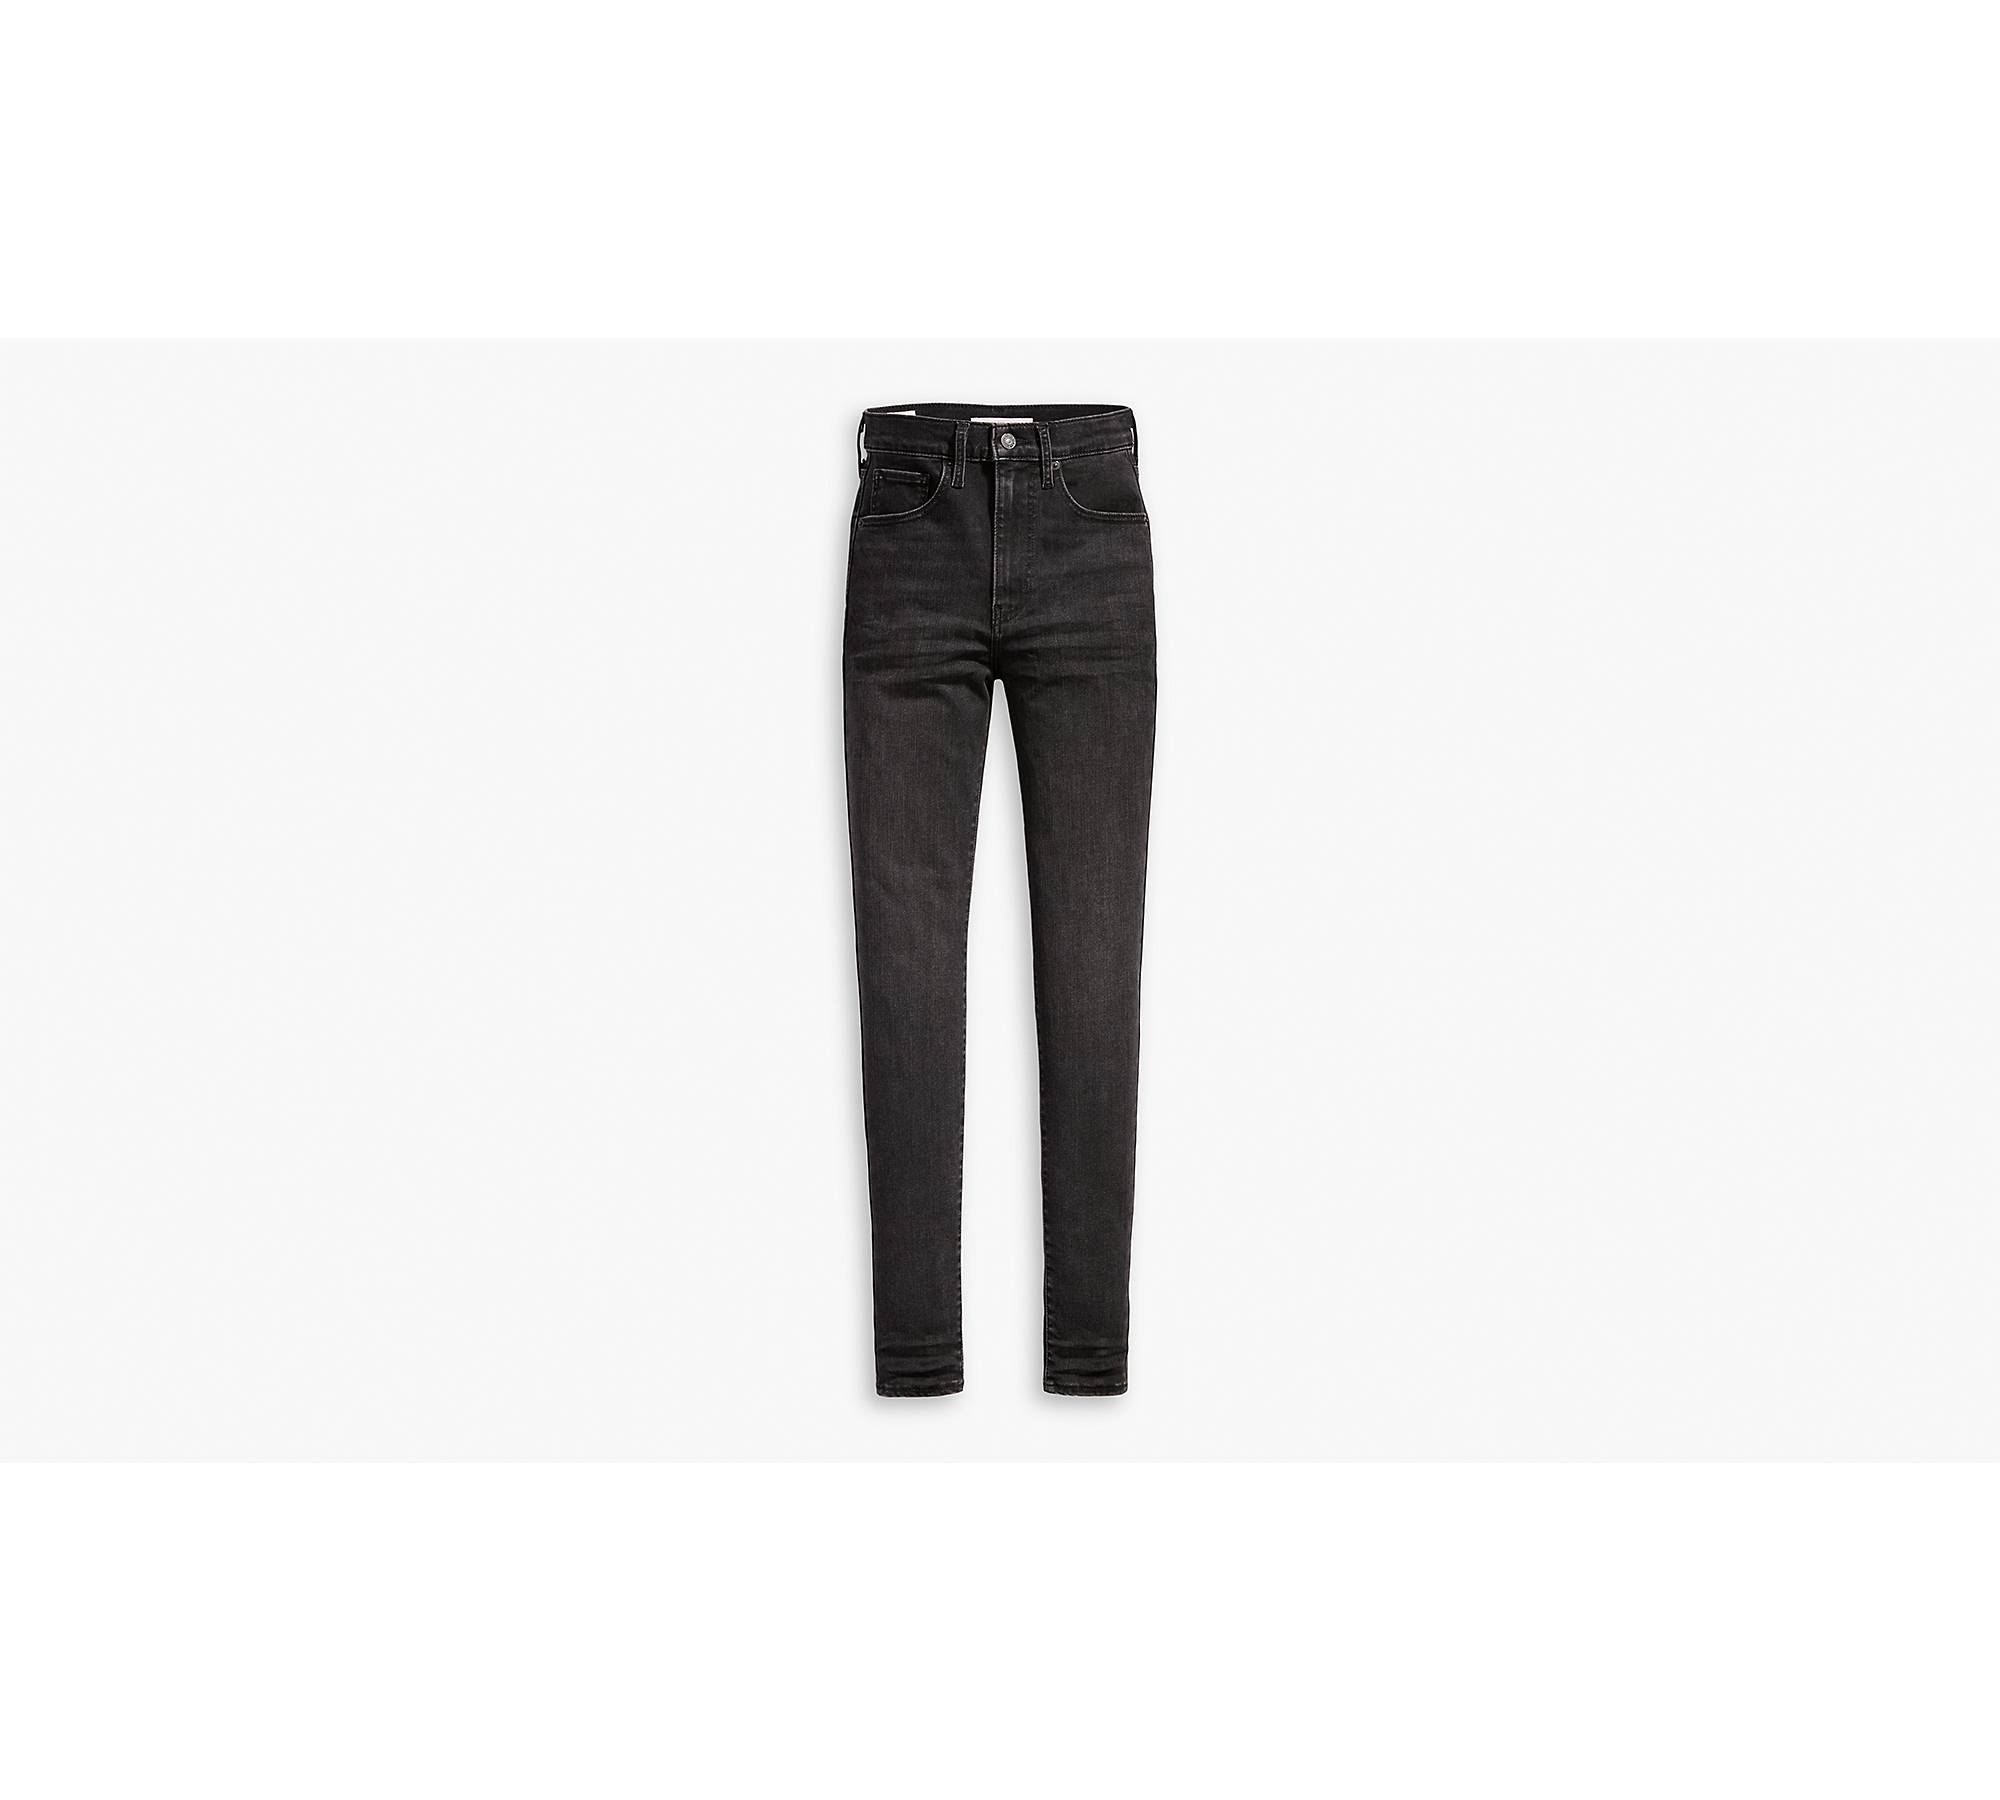 COLORADO Super Skinny Fit Jeans In Washed Black